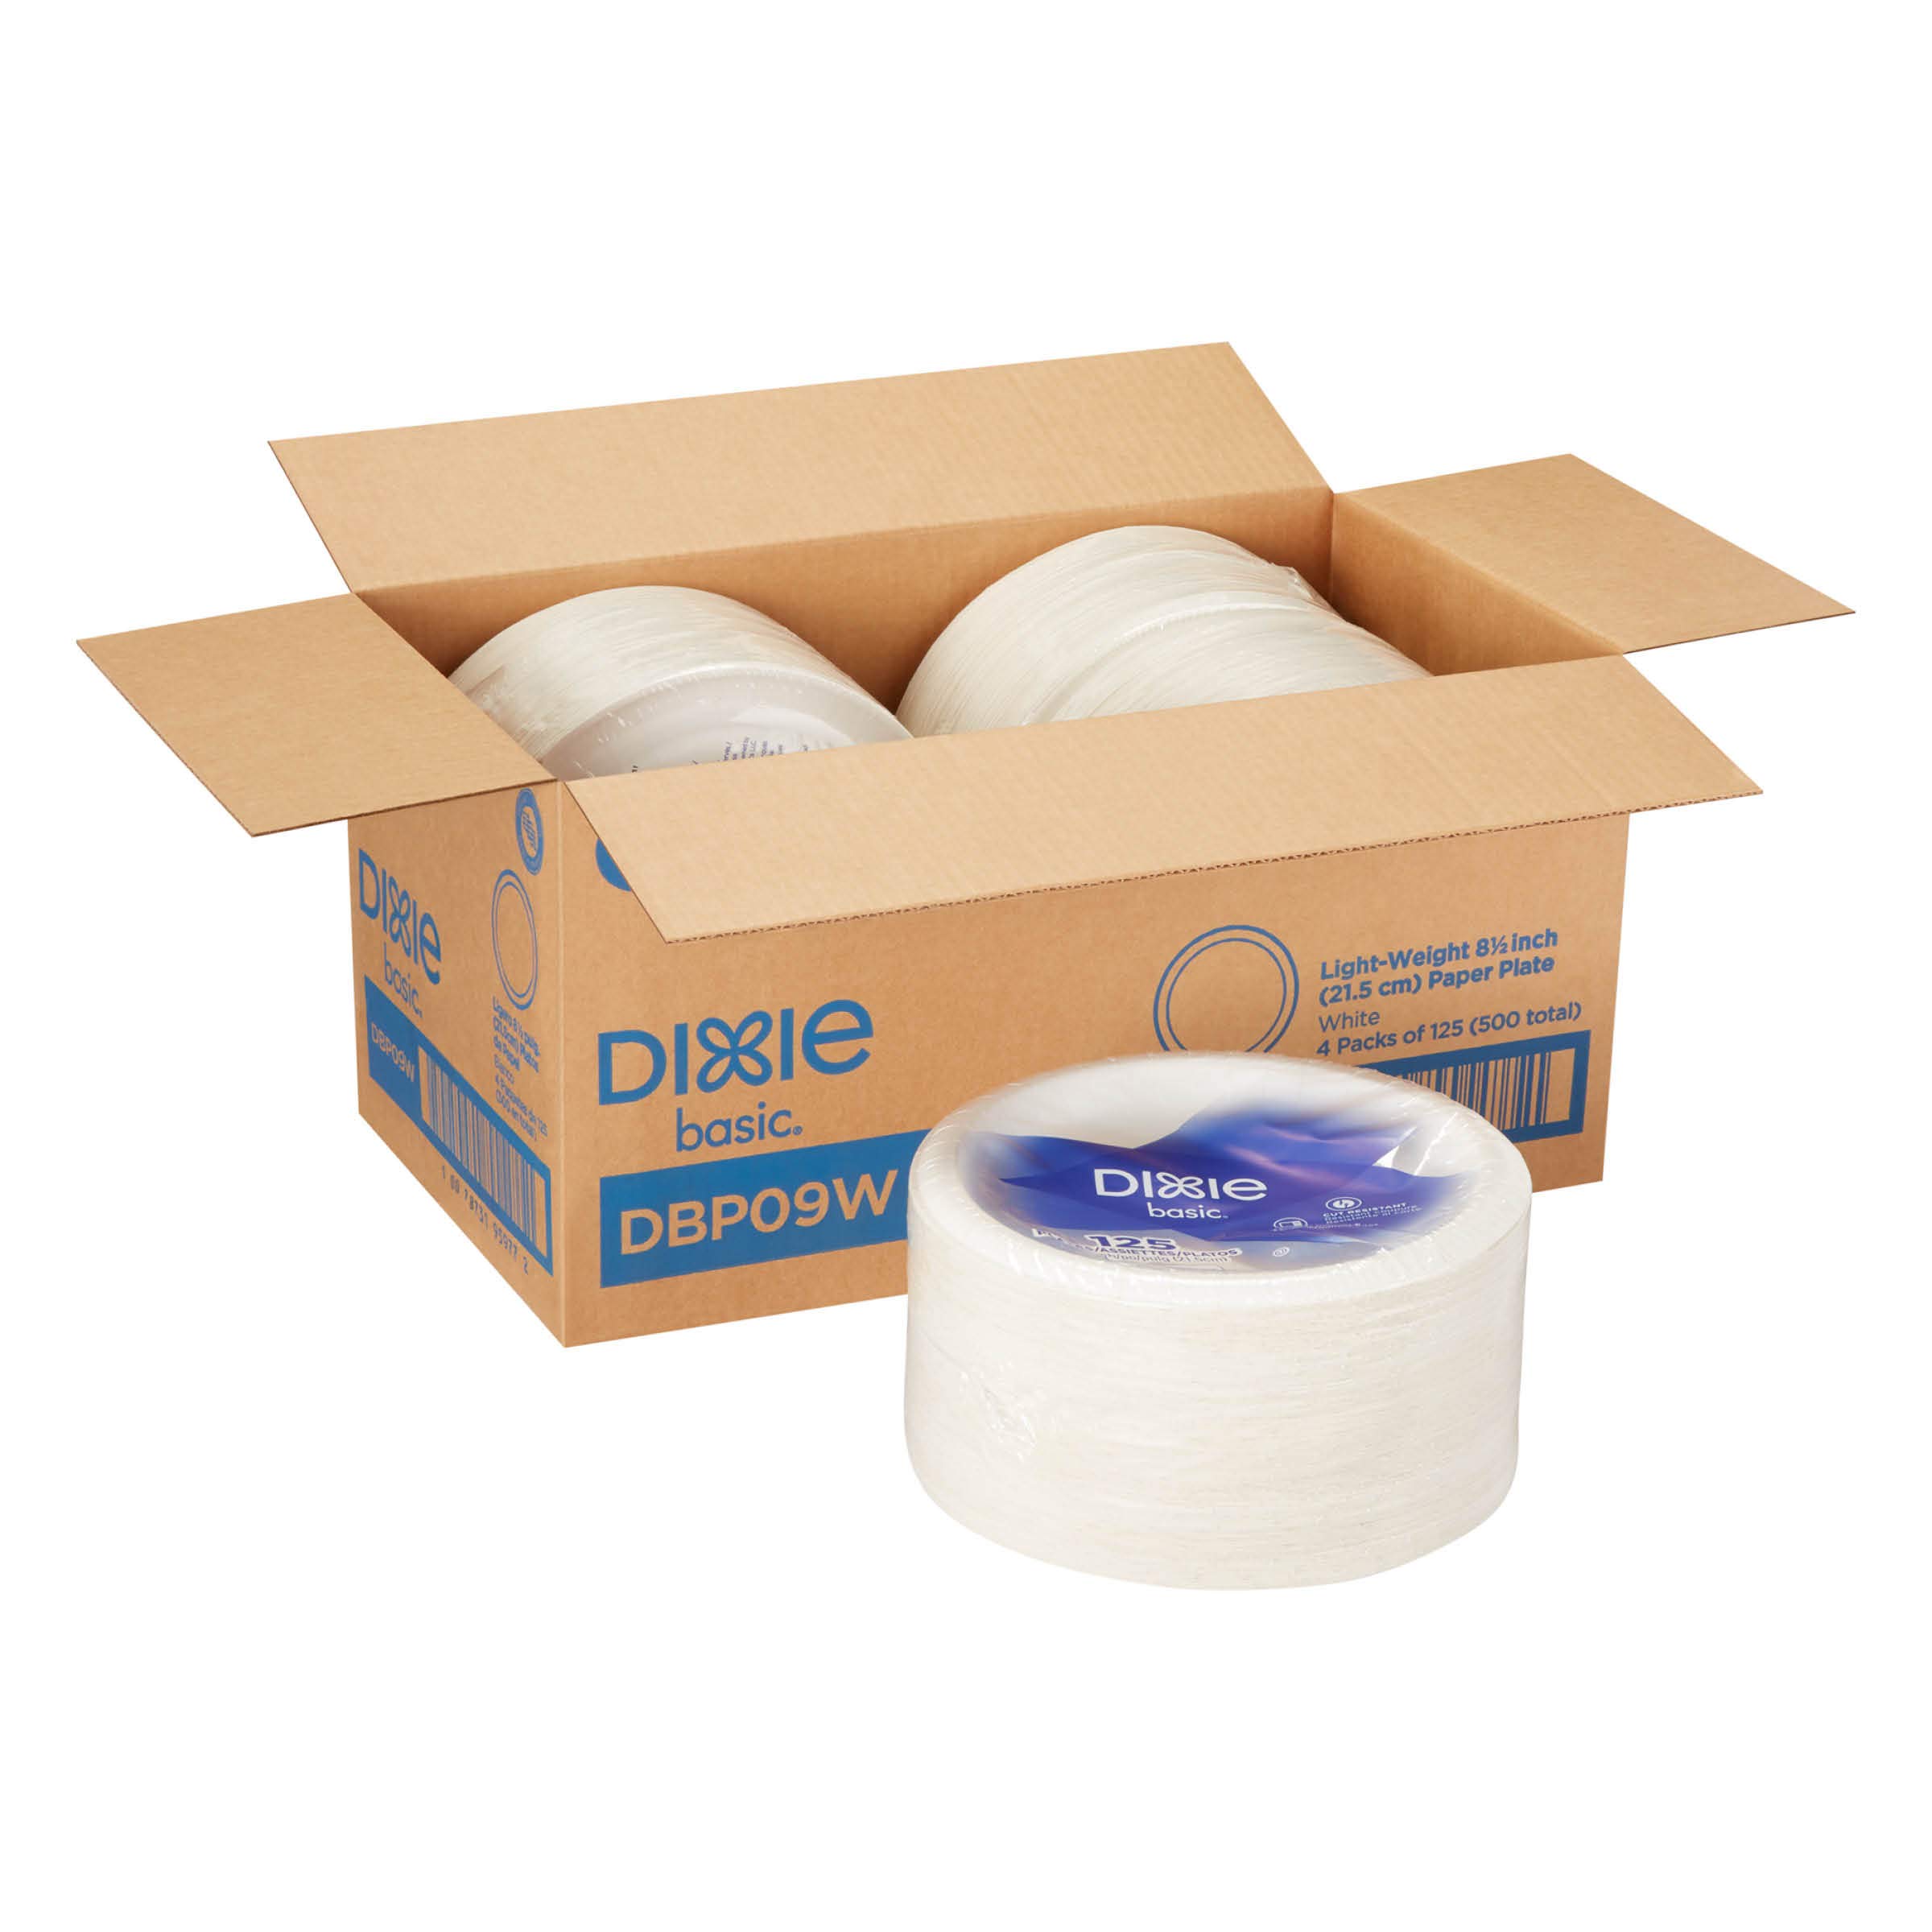 Dixie Basic 8.5 Light-Weight Paper Plates by GP PRO (Georgia-Pacific),  White, DBP09W, 500 Count (125 Plates Per Pack, 4 Packs Per Case) 8.5 in  Unwrapped